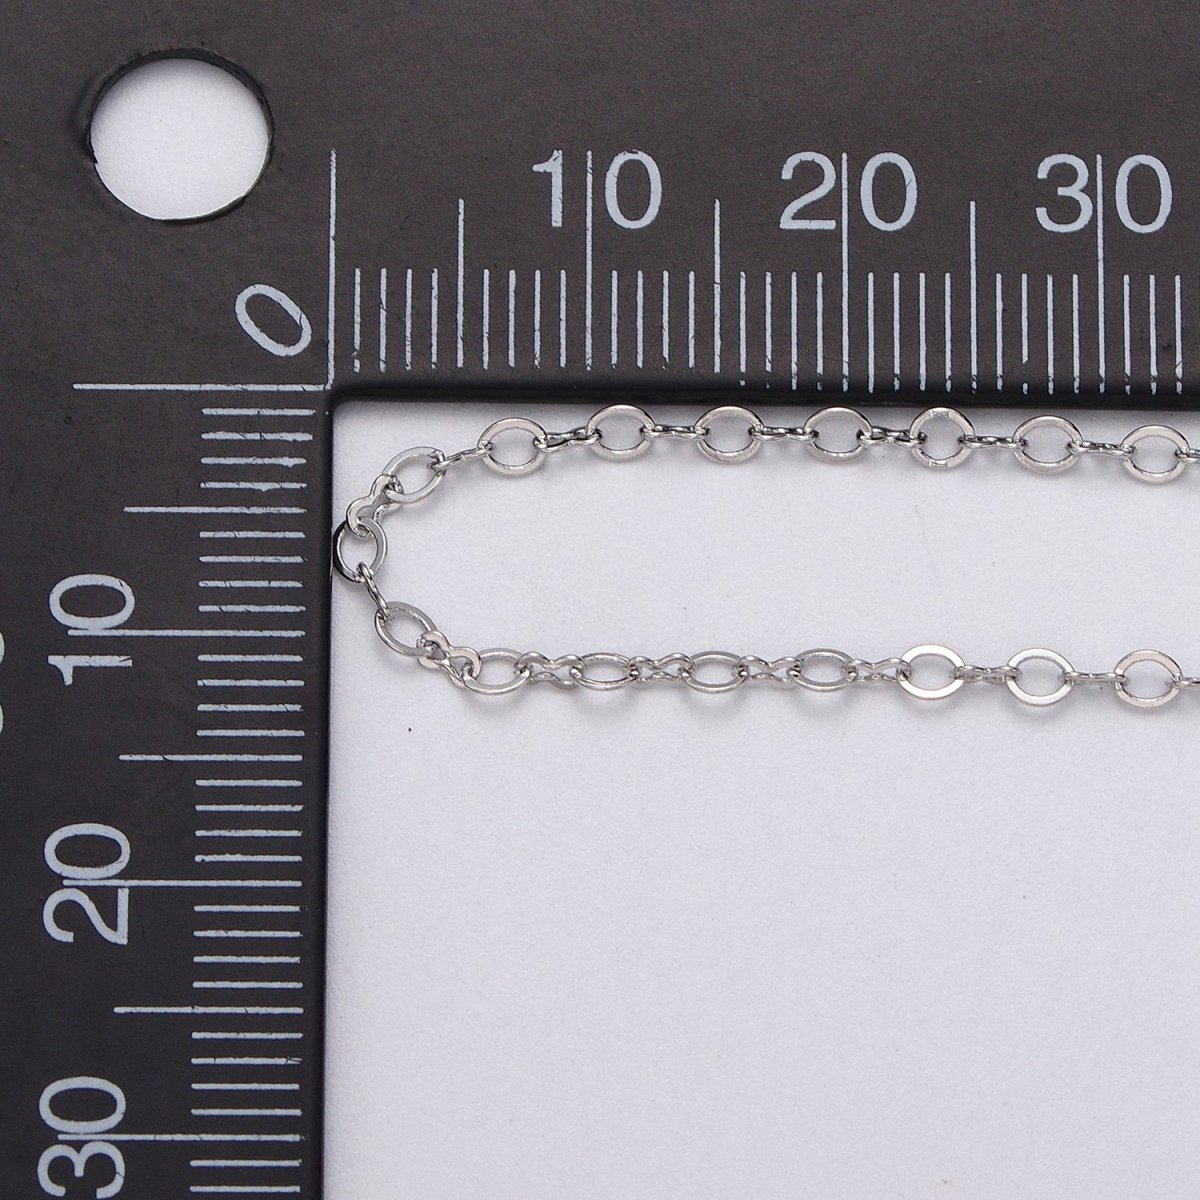 Dainty Silver 2mm Figure 8 Oval Cable Unfinished Dainty Chain, By The yard Wholesale Bulk Jewelry Chain for Making Supply | ROLL-1073 Clearance Pricing - DLUXCA